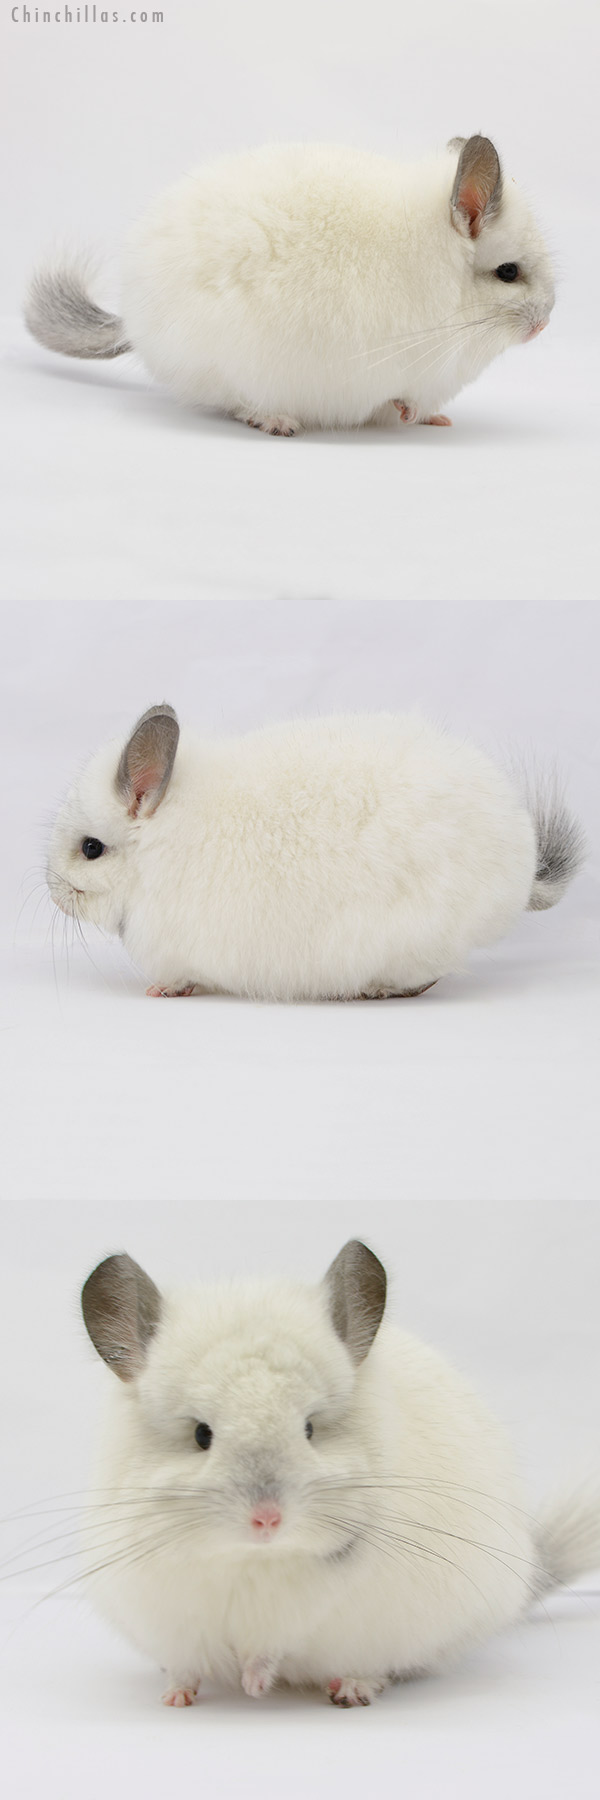 Chinchilla or related item offered for sale or export on Chinchillas.com - 20174 Predominantly White  Royal Persian Angora Male Chinchilla